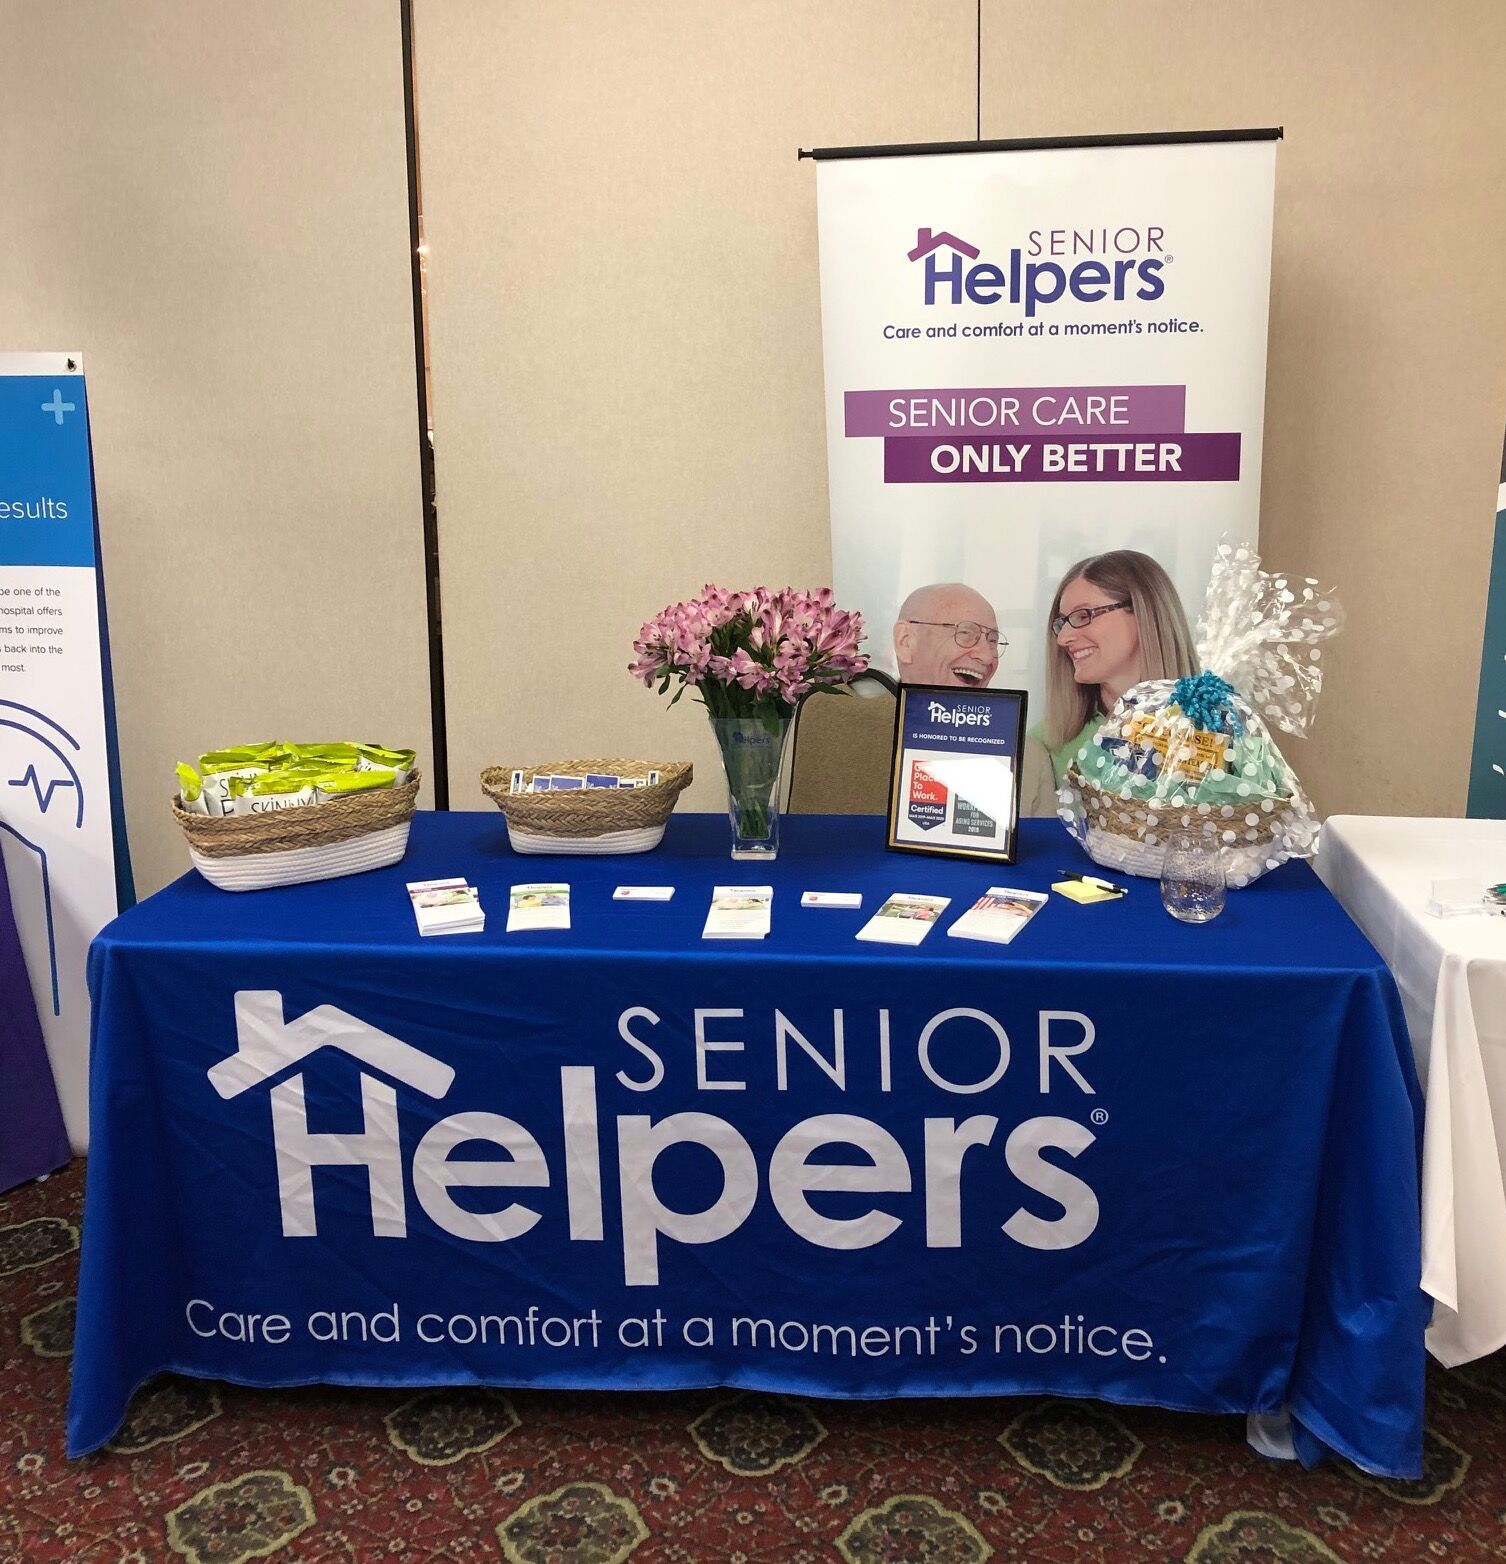 Senior Helpers was a participating sponsor at the Memory Matters Brain Health Summit.